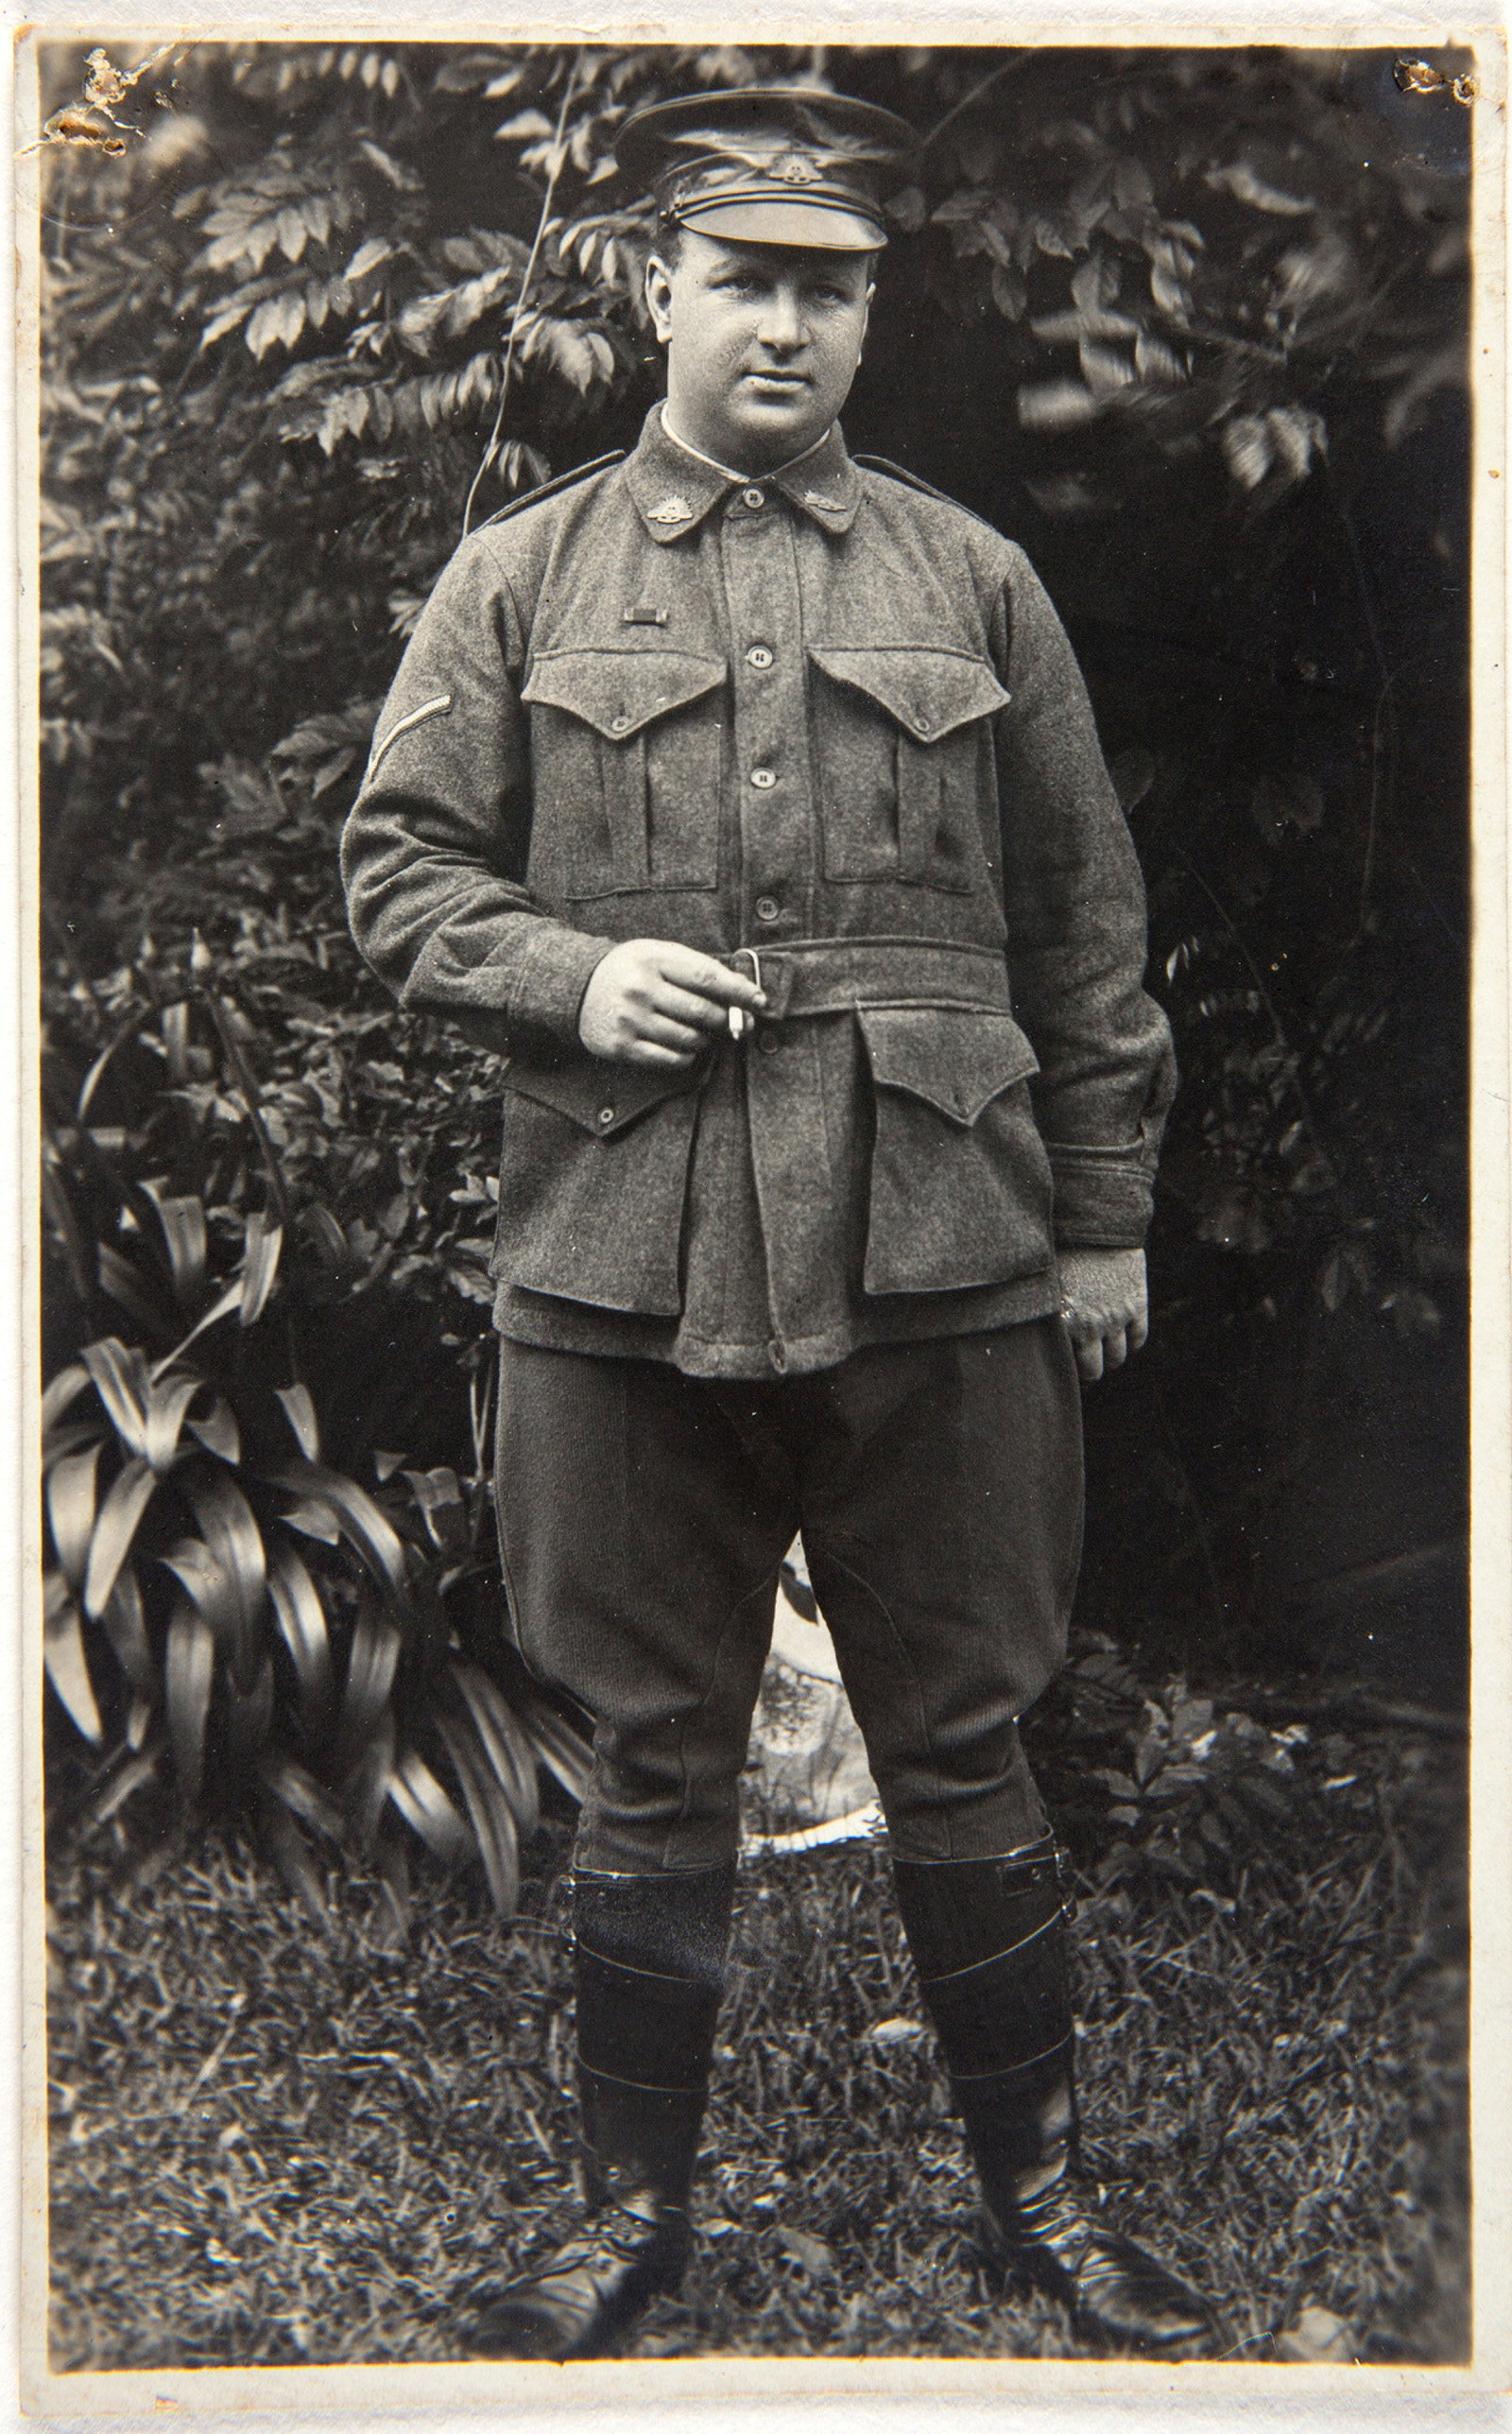 Black and white photo of man in uniform.